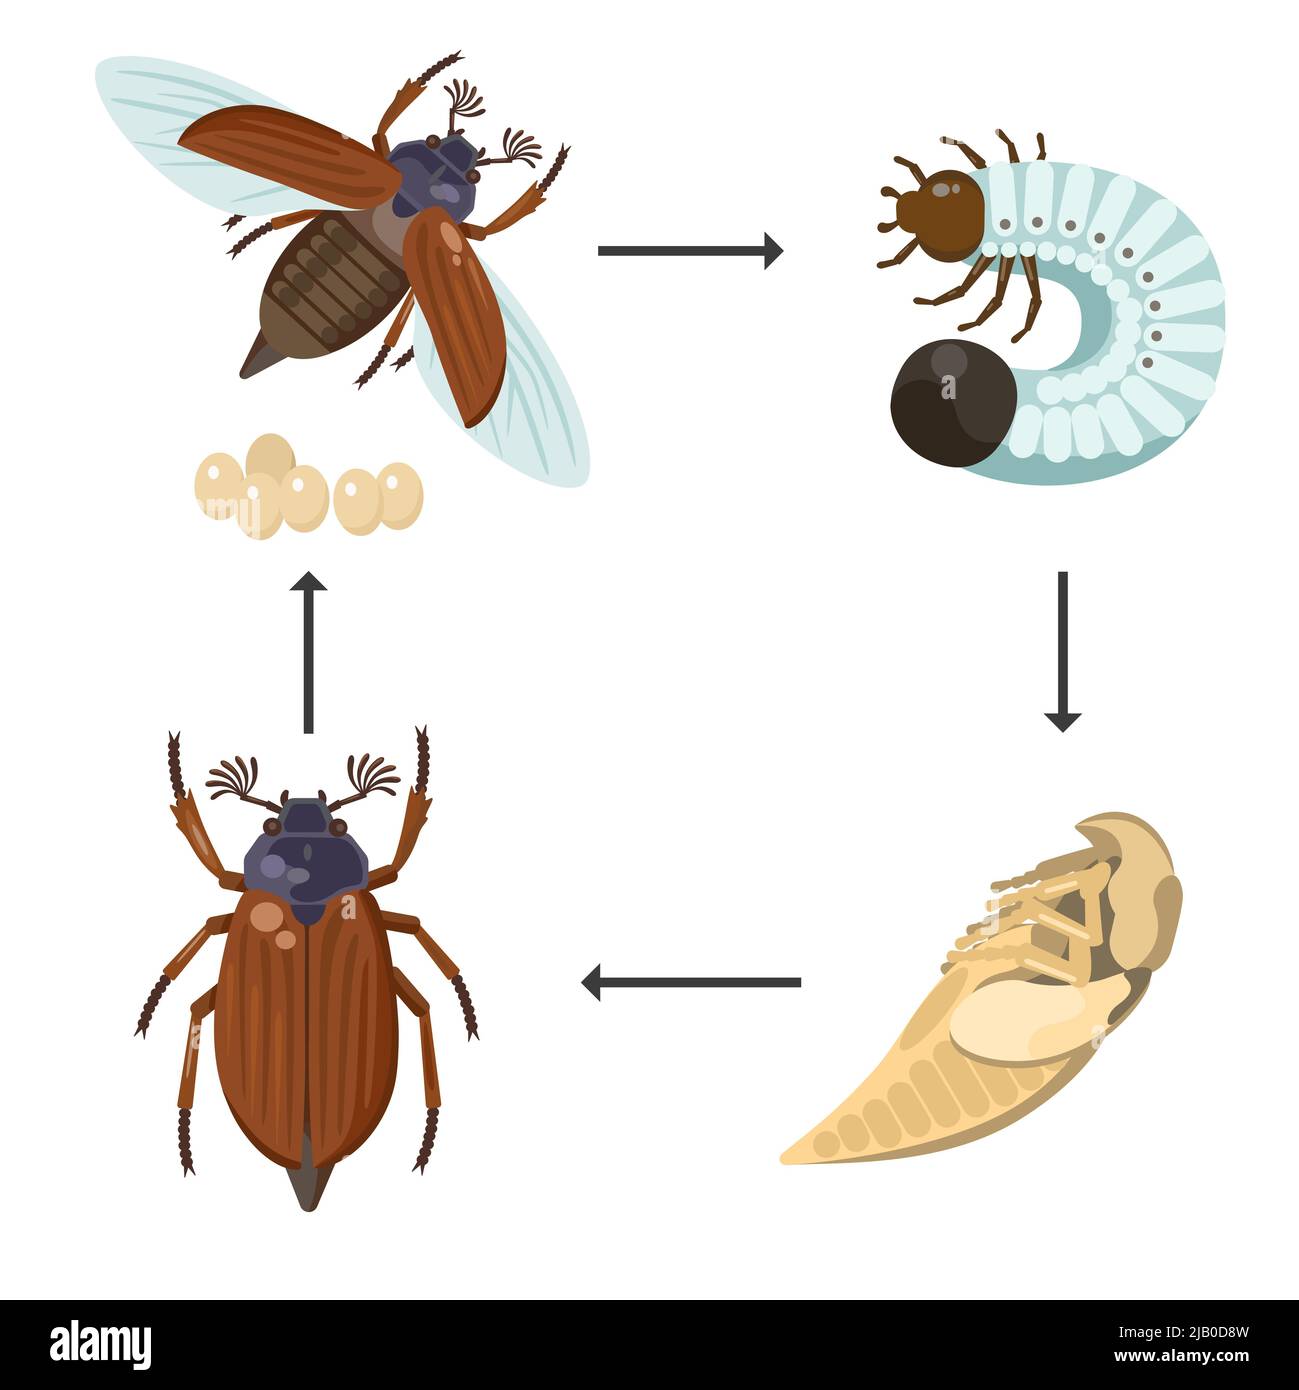 Development cycle of chafer, may bug, Melolontha melolontha. Imago insects with other life stages.  Stock Vector